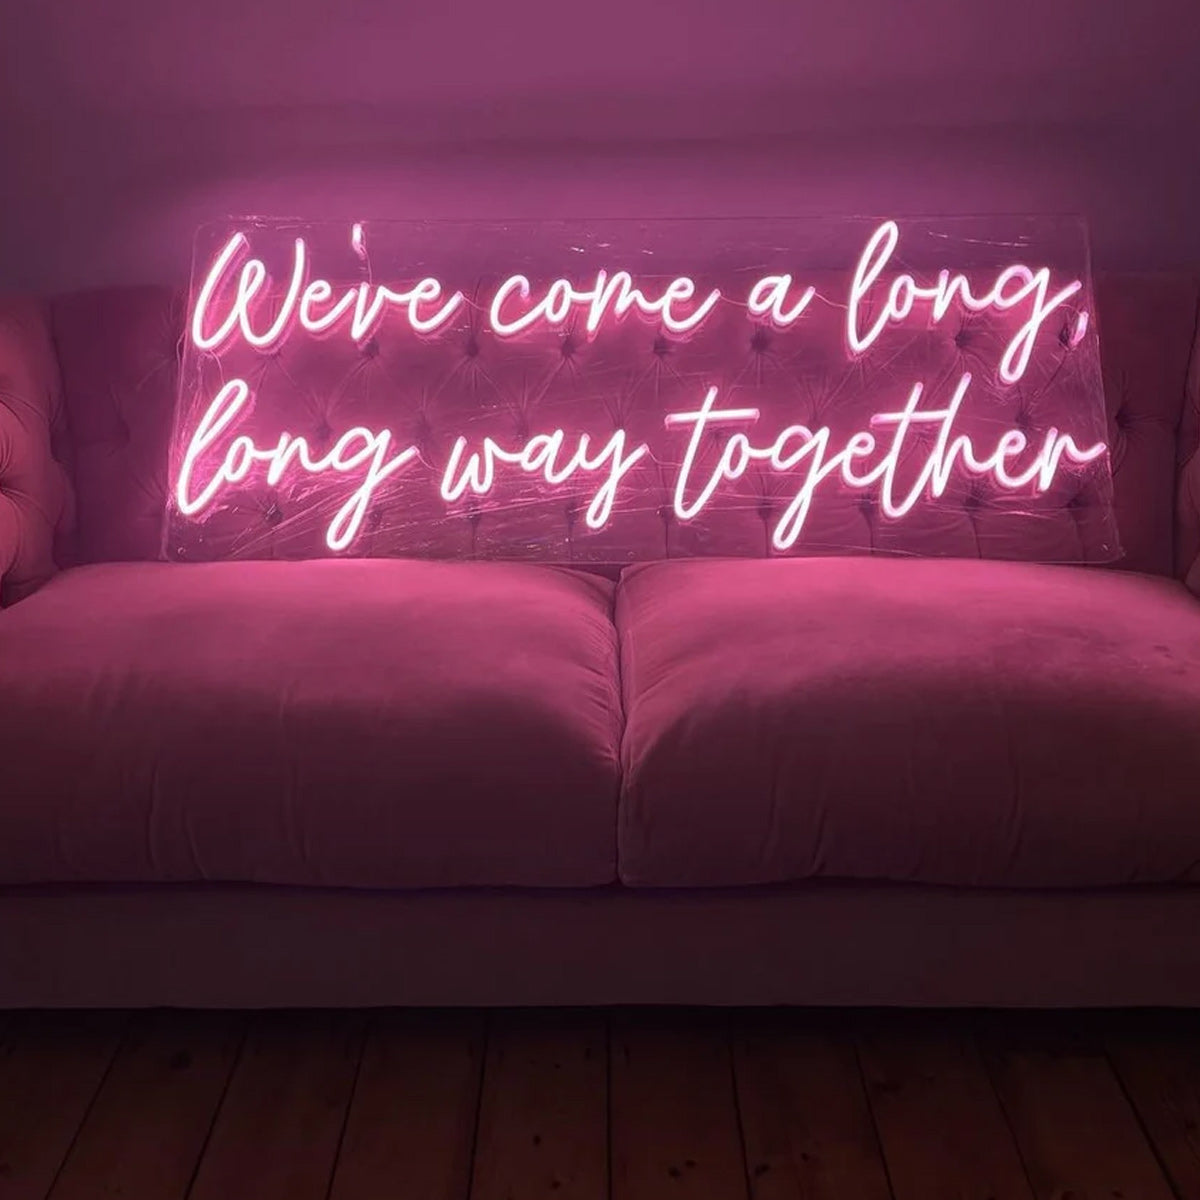 NEONIP-100% Handmade We've come a long, long way together LED Neon Light Sign